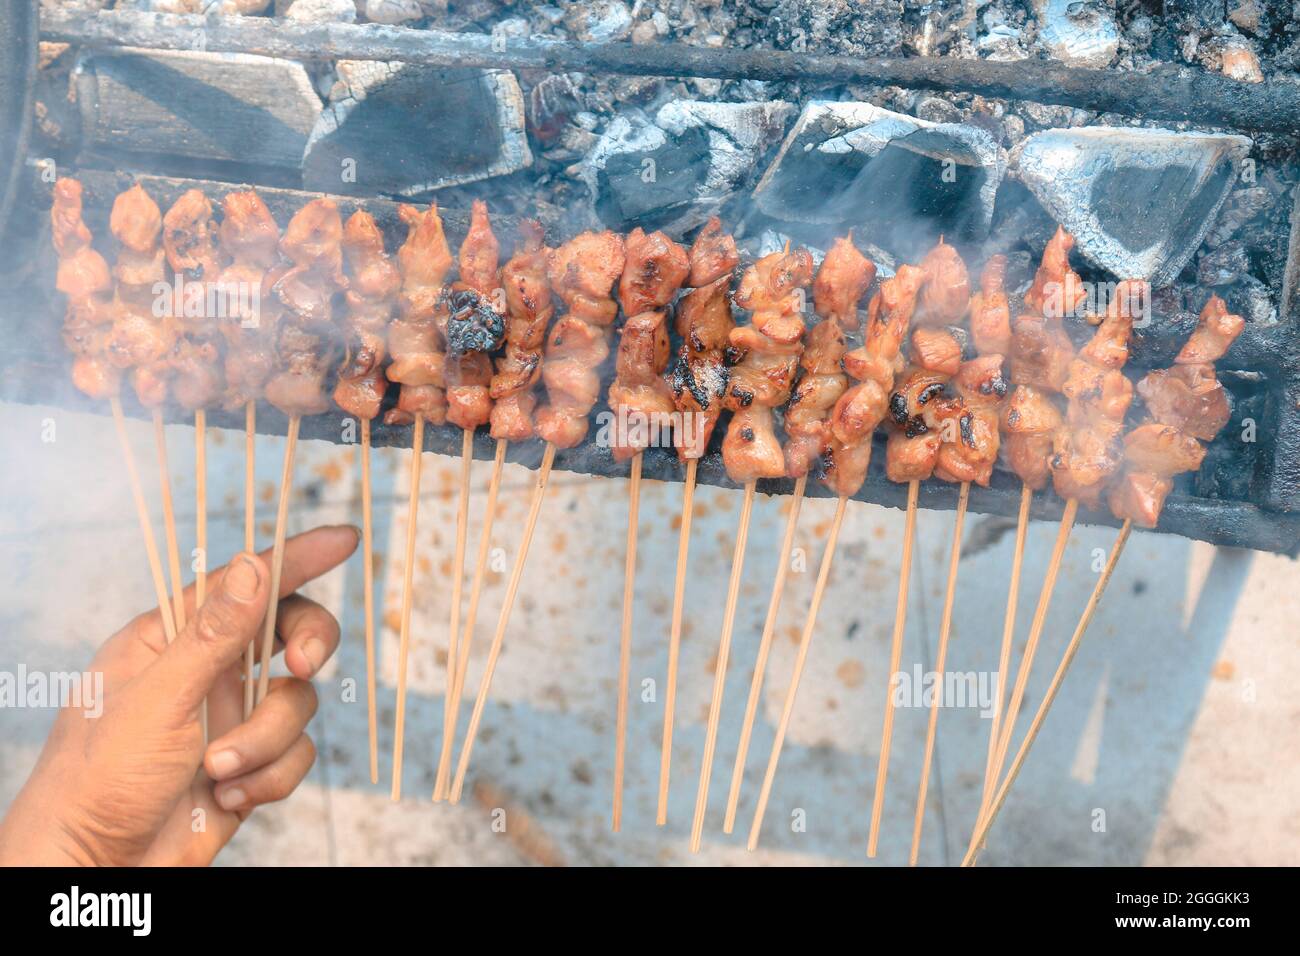 Top view of Sate Kambing or goat satay on red fire grilling by people. Stock Photo